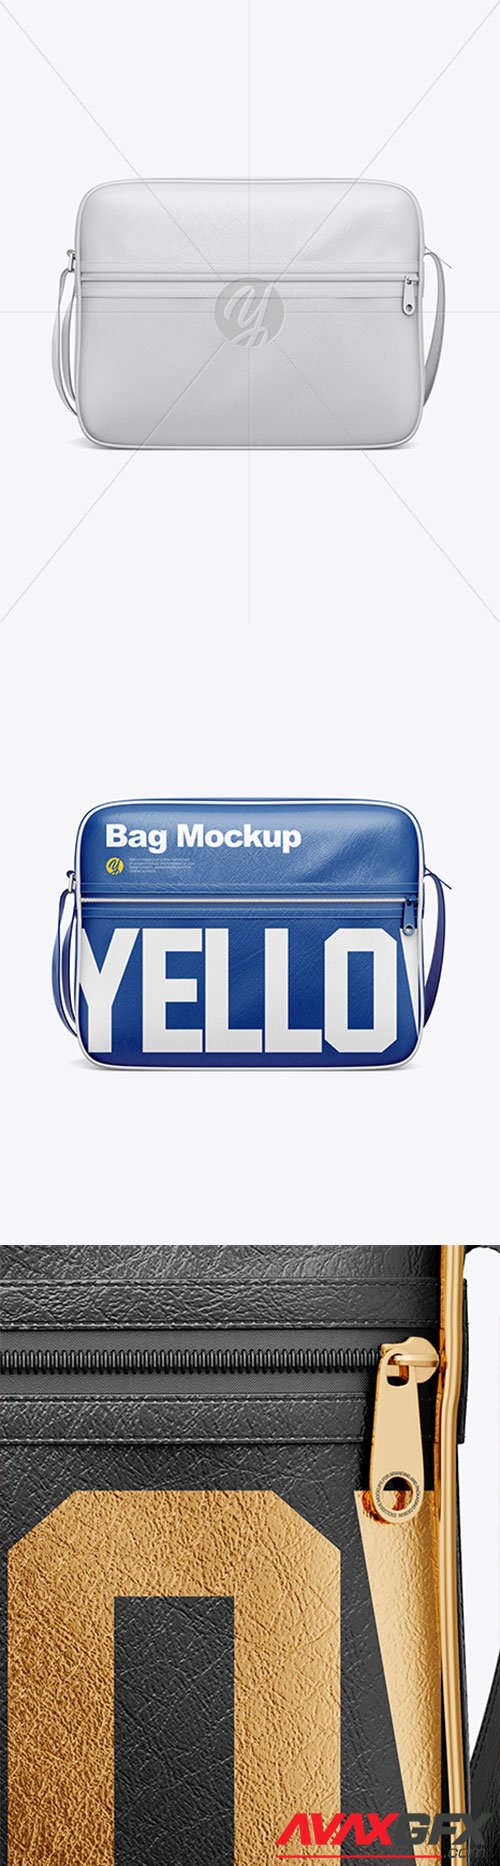 Download Shoulder Bag Mockup - Front View 24939 » AVAXGFX - All ...